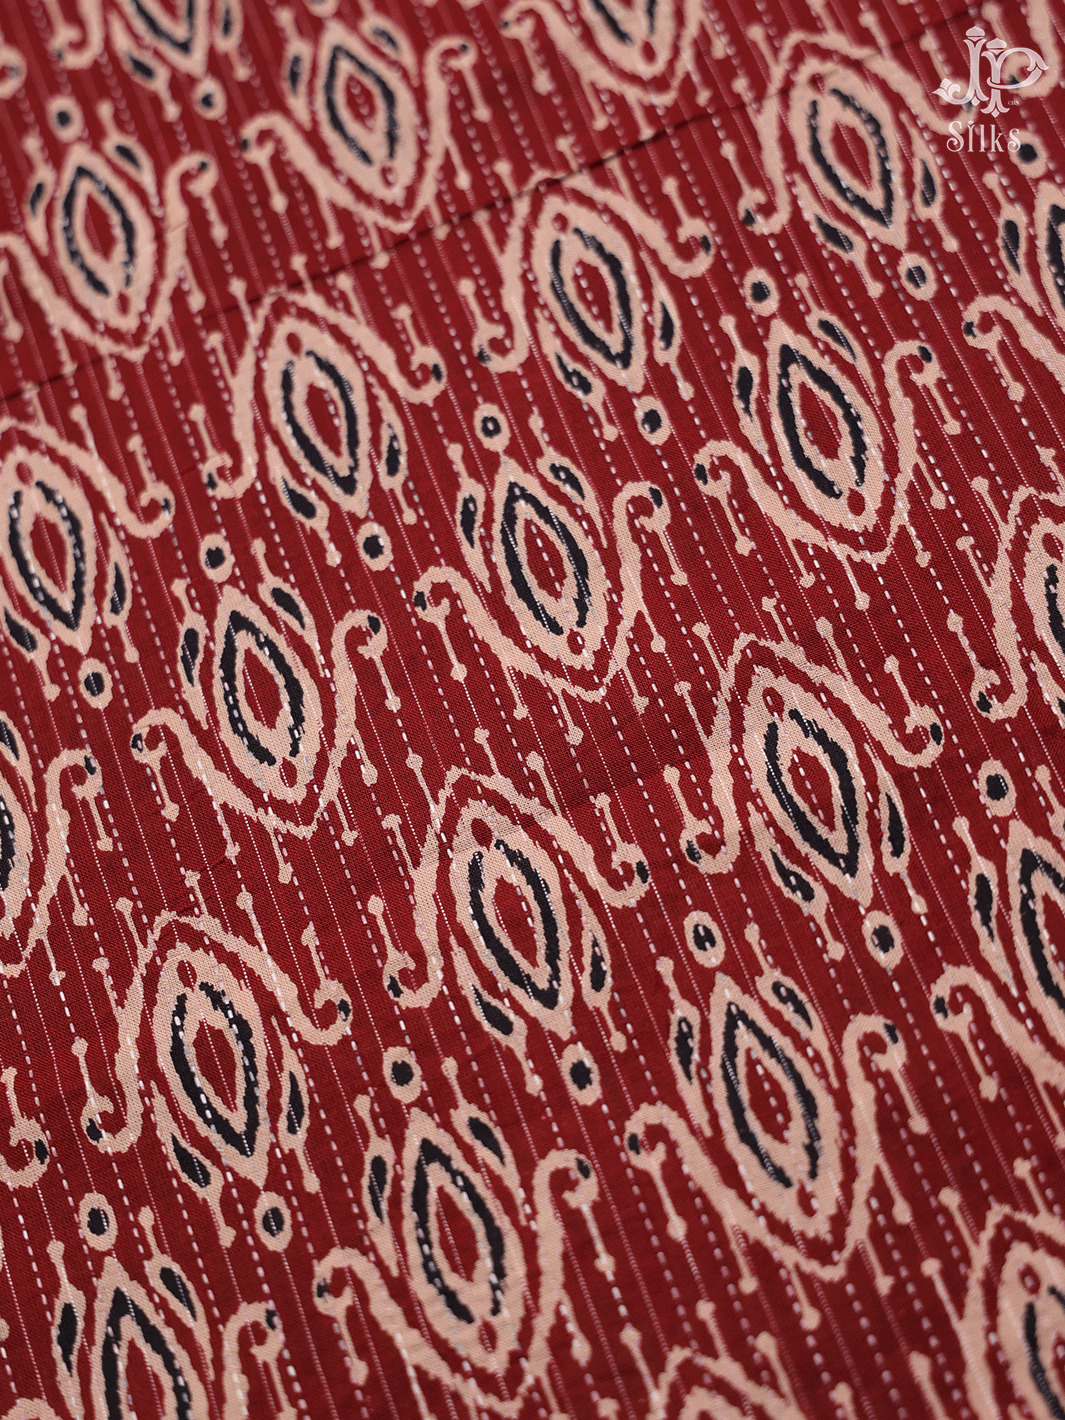 Maroon and Black Cotton Chudidhar Material - E6126 - View 1